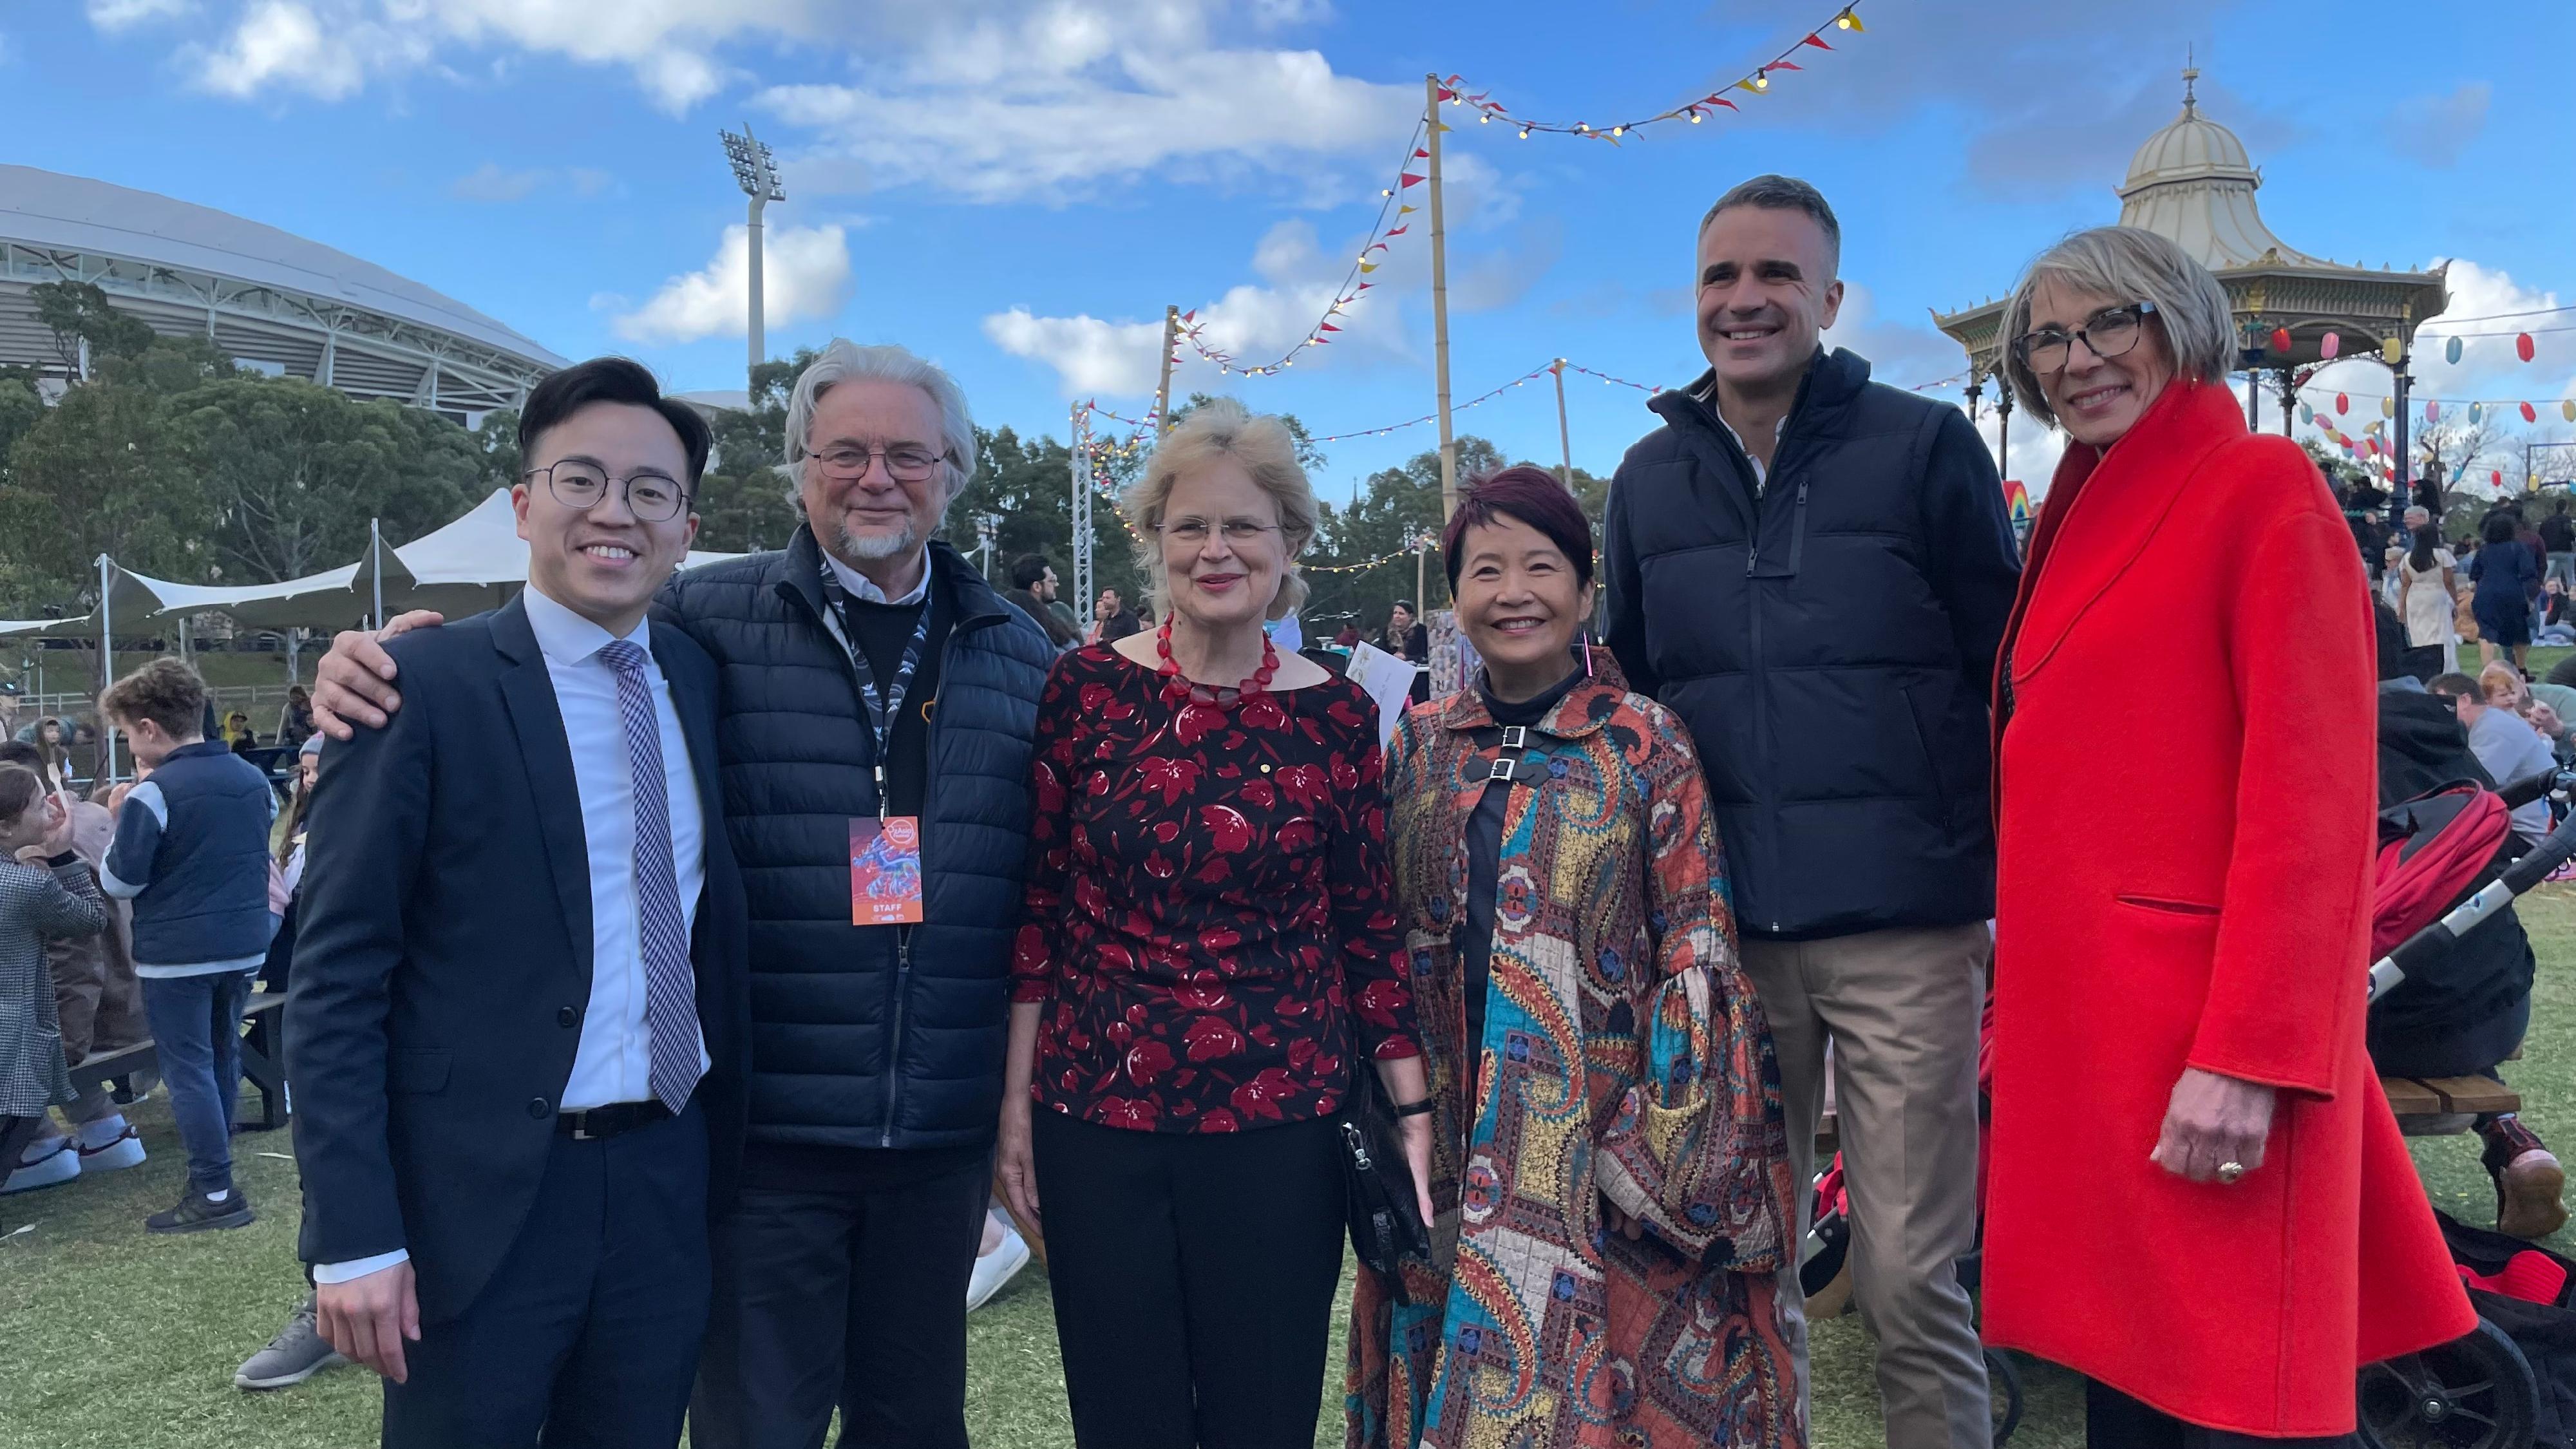 The Deputy Director of the Hong Kong Economic and Trade Office, Sydney, Mr Henry Mak (first left), is pictured with (from second left) the Chief Executive Officer and Artistic Director of Adelaide Festival Centre, Mr Douglas Gautier; the Governor of South Australia, Ms Frances Adamson; the Artistic Director of the 2023 OzAsia Festival, Ms Annette Shun Wah; the Premier of South Australia, Mr Peter Malinauskas; and the Lord Mayor of the City of Adelaide, Dr Jane Lomax-Smith, at a reception of the Moon Lantern Trail of the OzAsia Festival held in Adelaide, Australia, on October 21.




